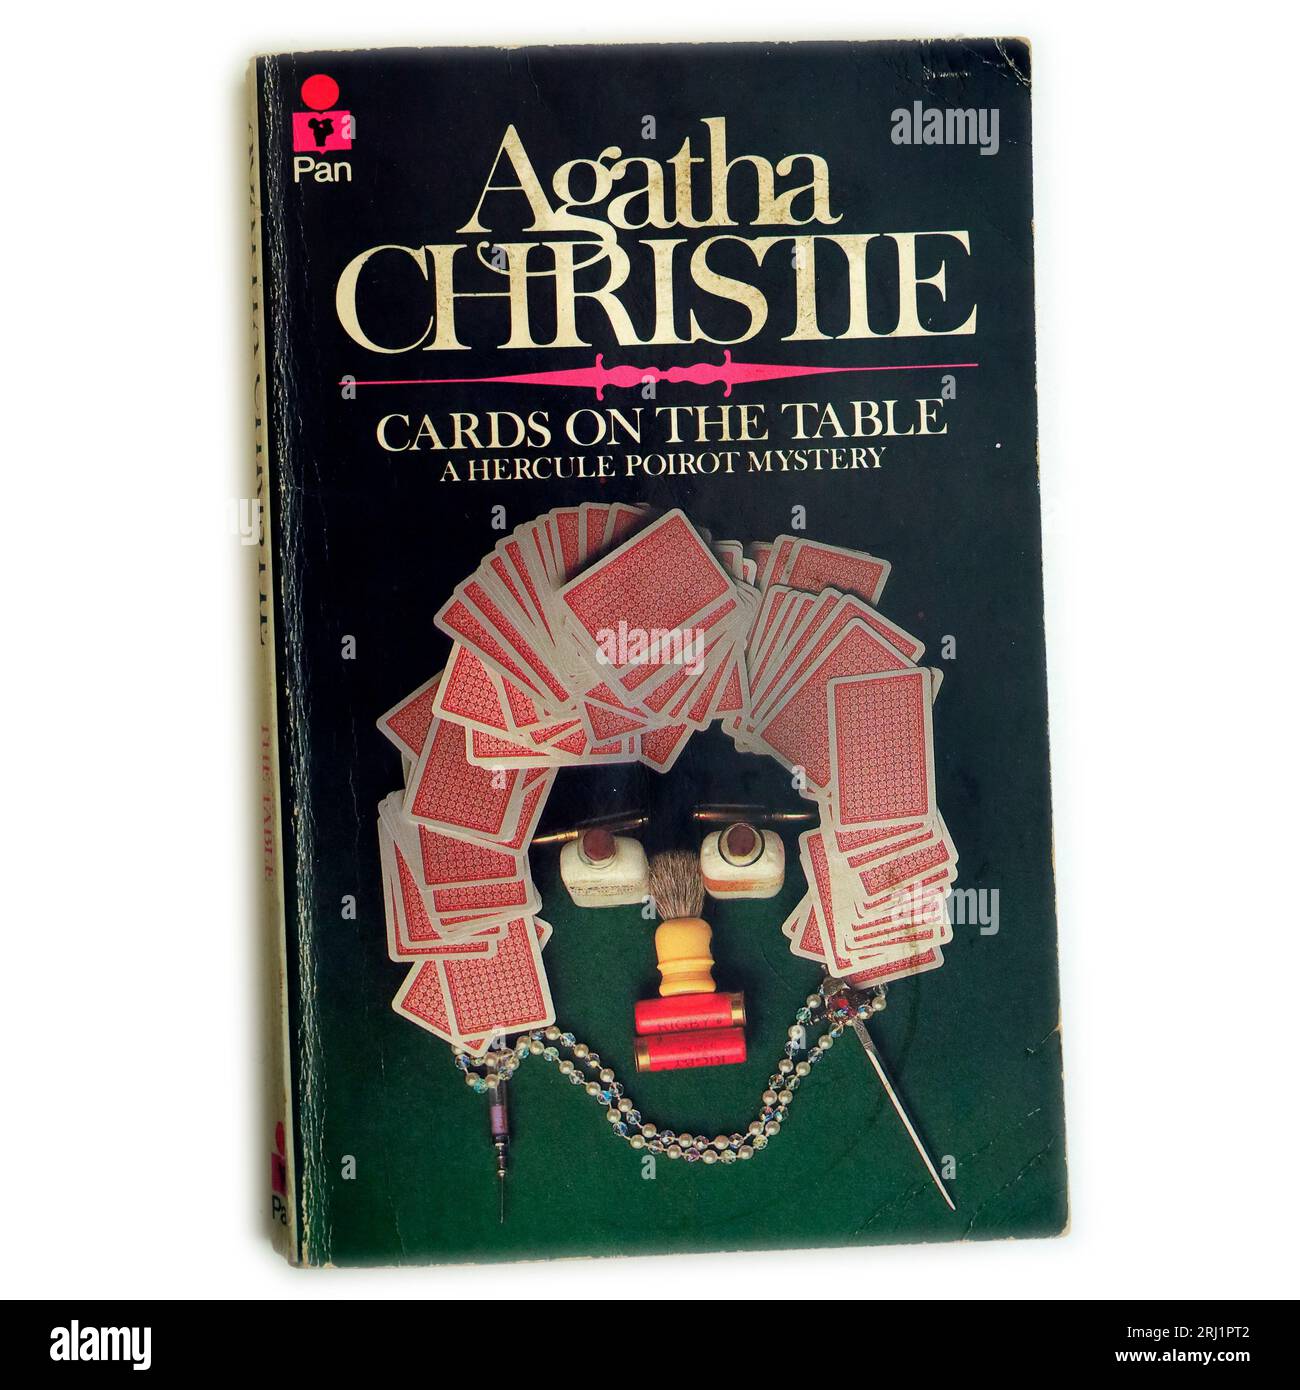 Cards on The Table.  Paperback book cover. A Hercule Poirot Mystery.  by Agatha Christie. Stock Photo